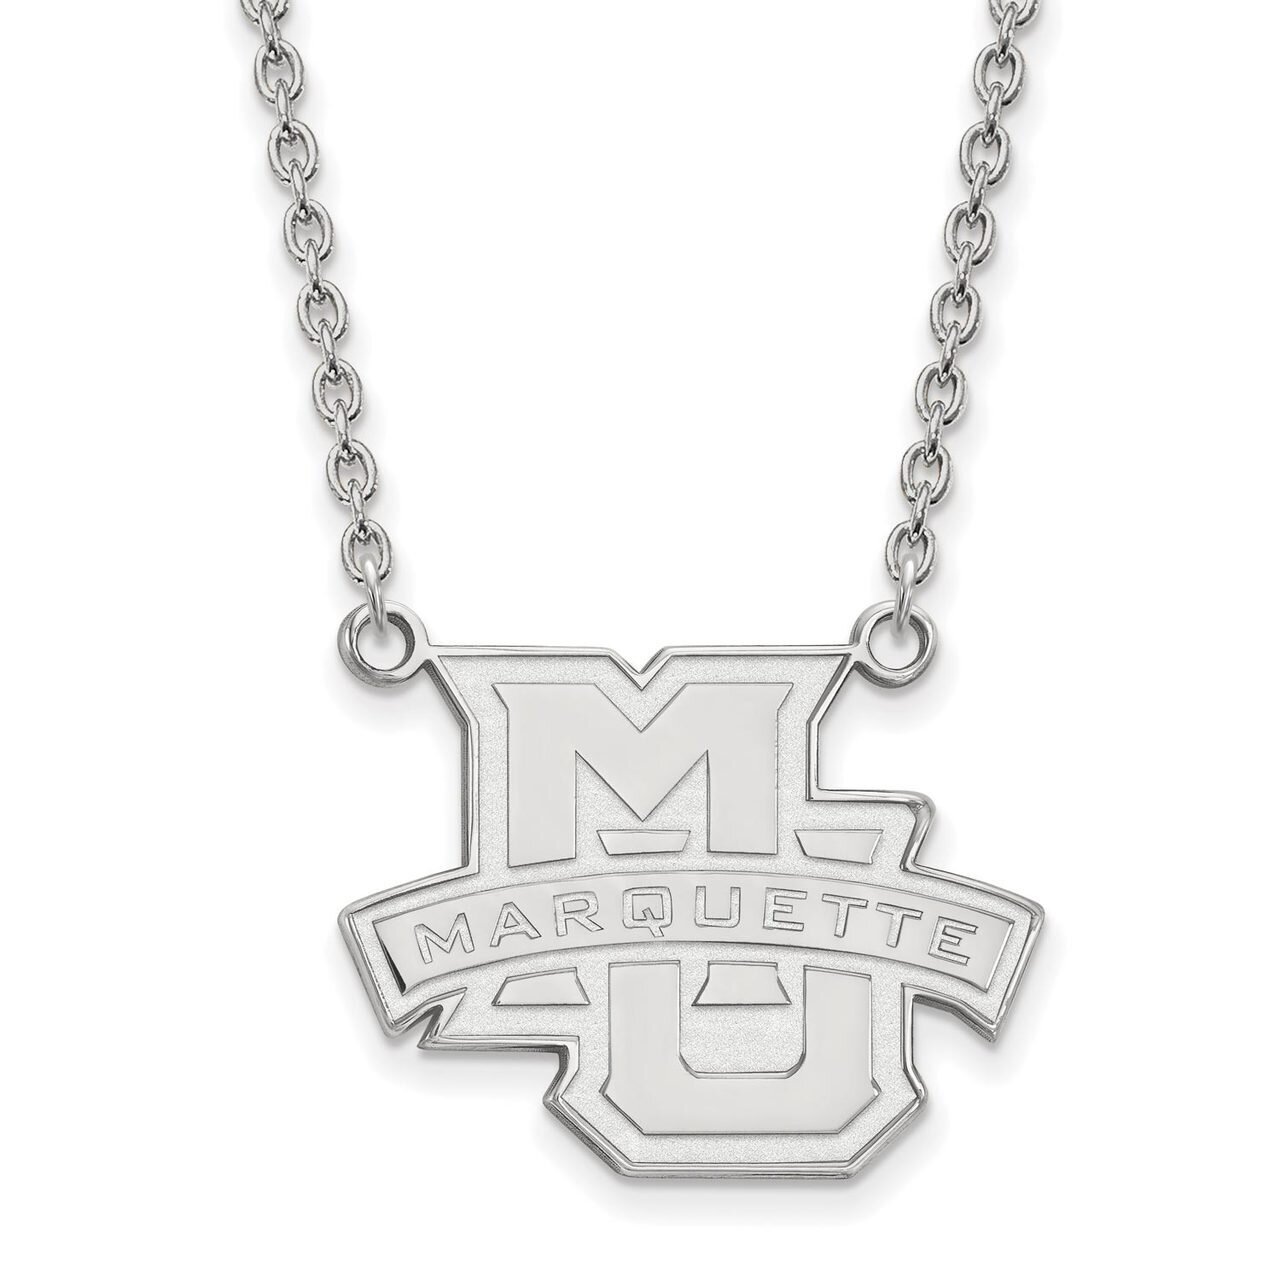 Marquette University Large Pendant with Chain Necklace 10k White Gold 1W008MAR-18